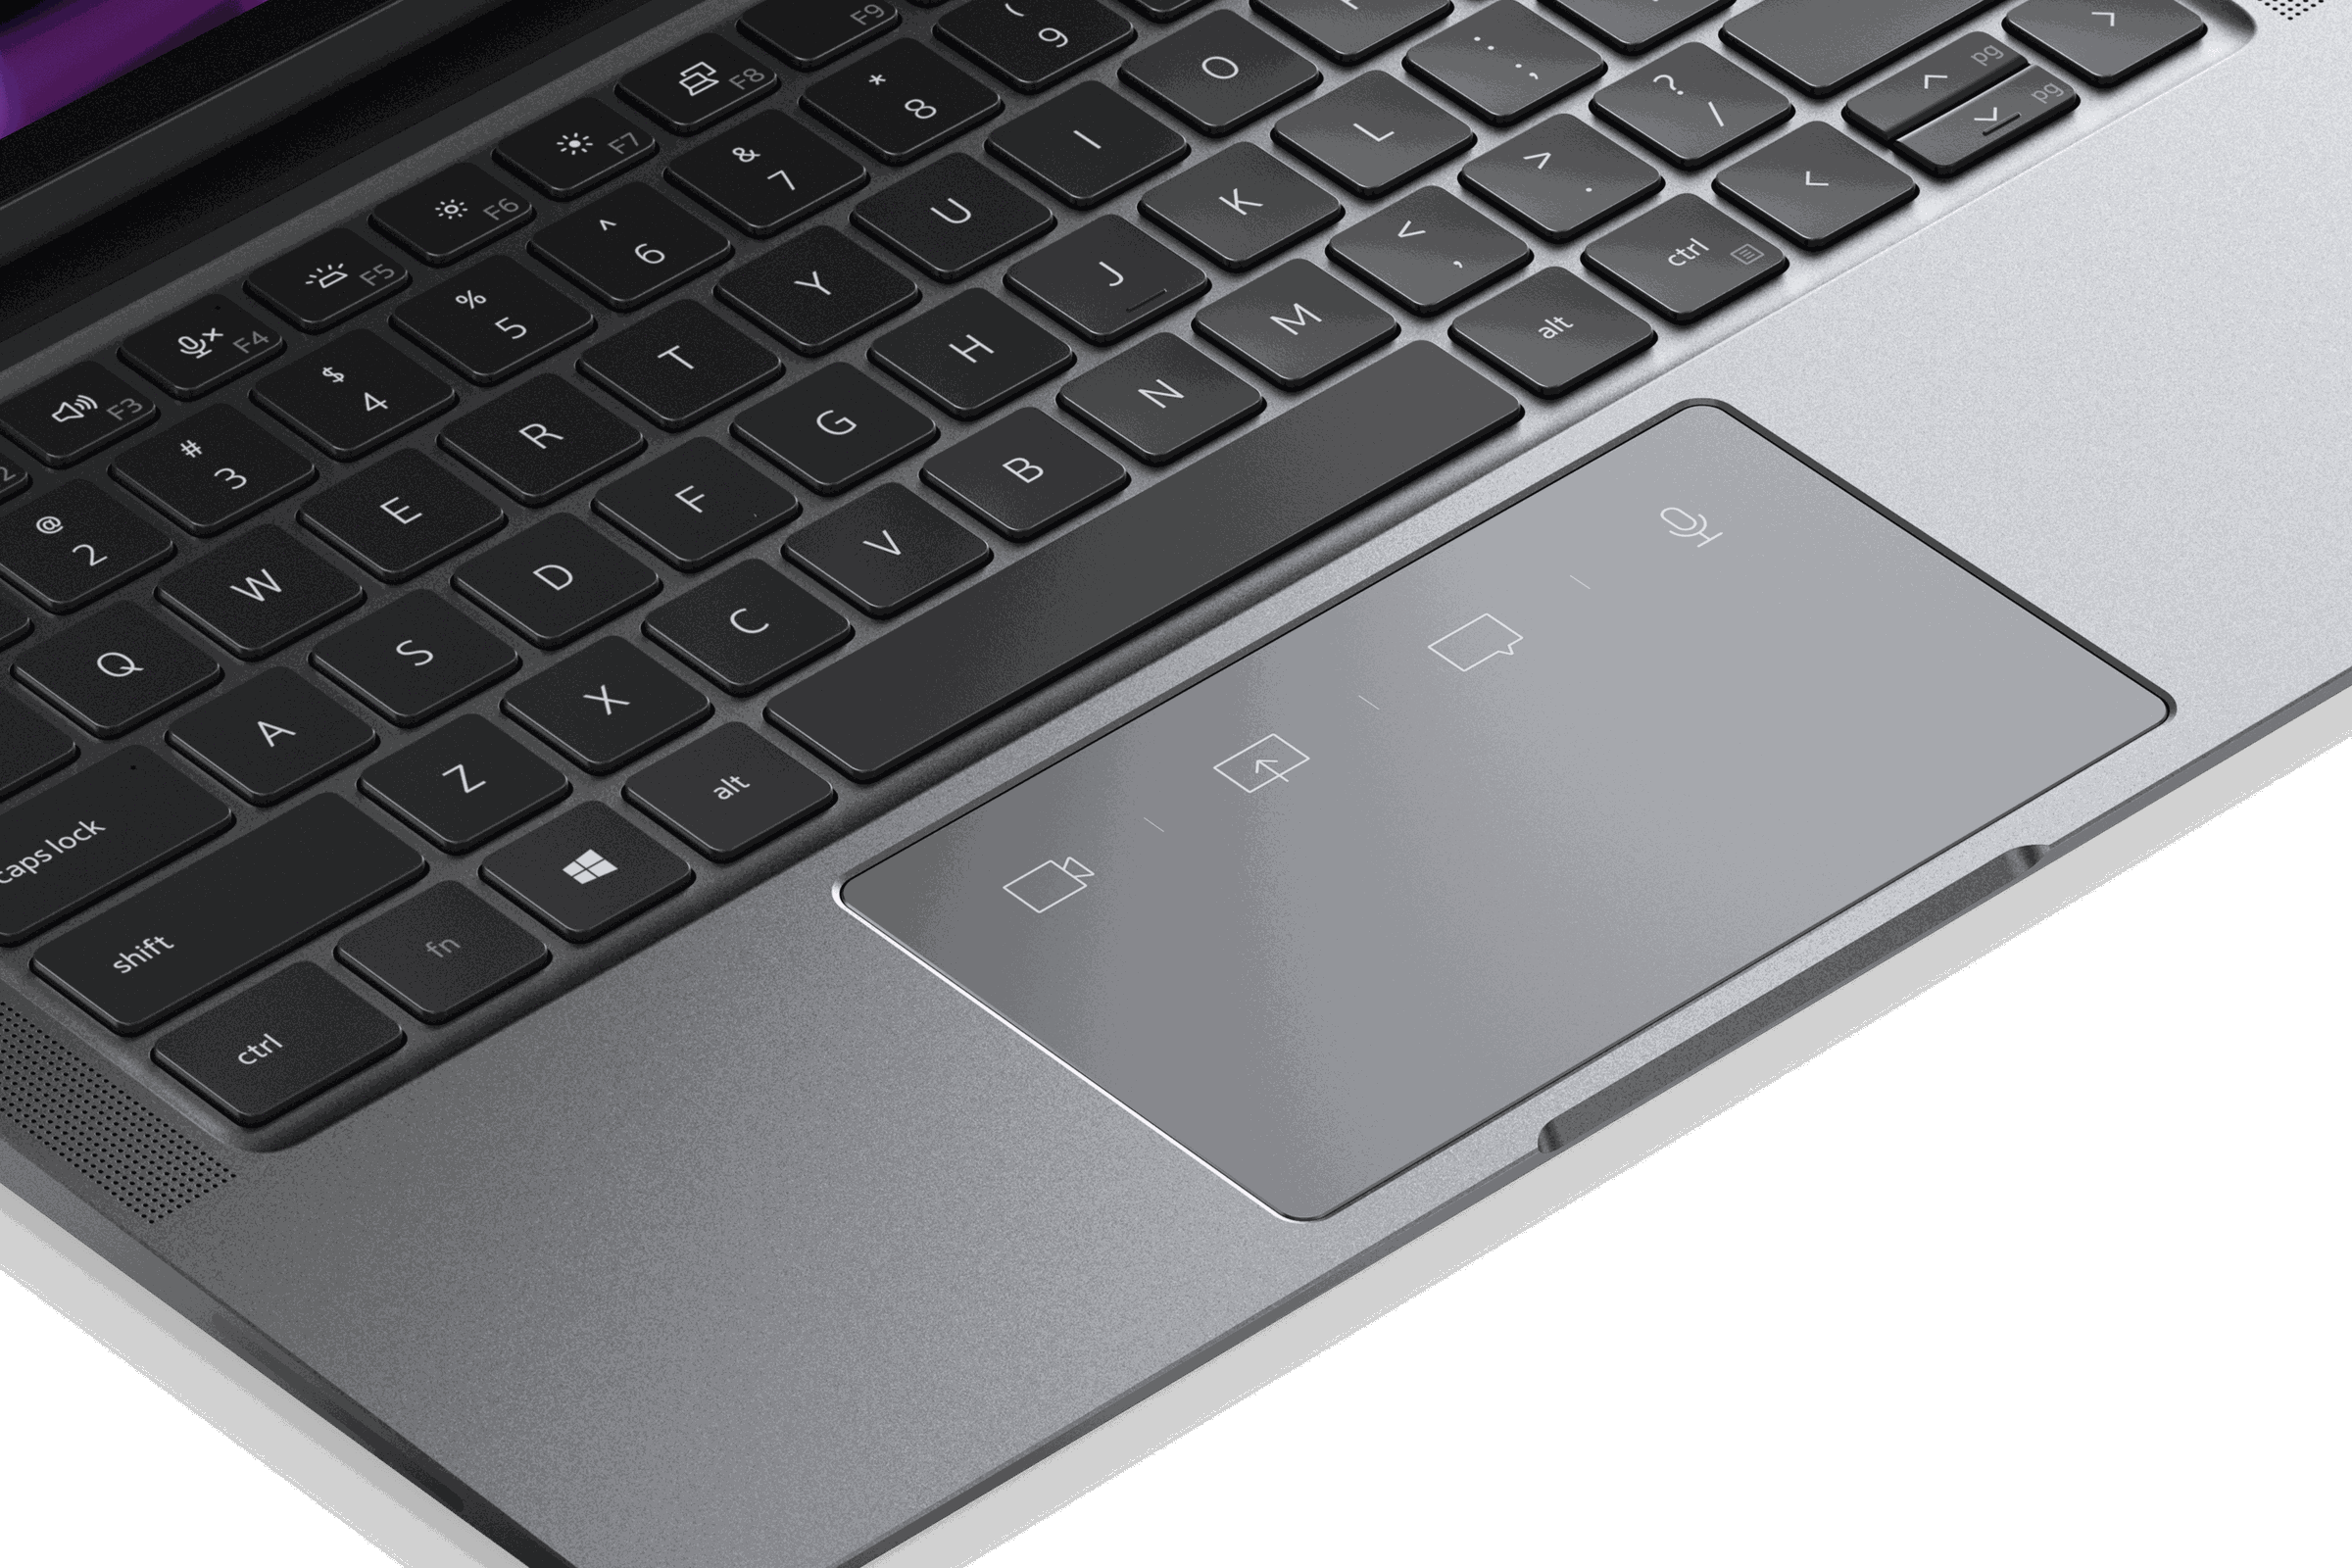 The touchpad of the Dell Latitude 9330 with touchpad buttons illuminated seen from above.